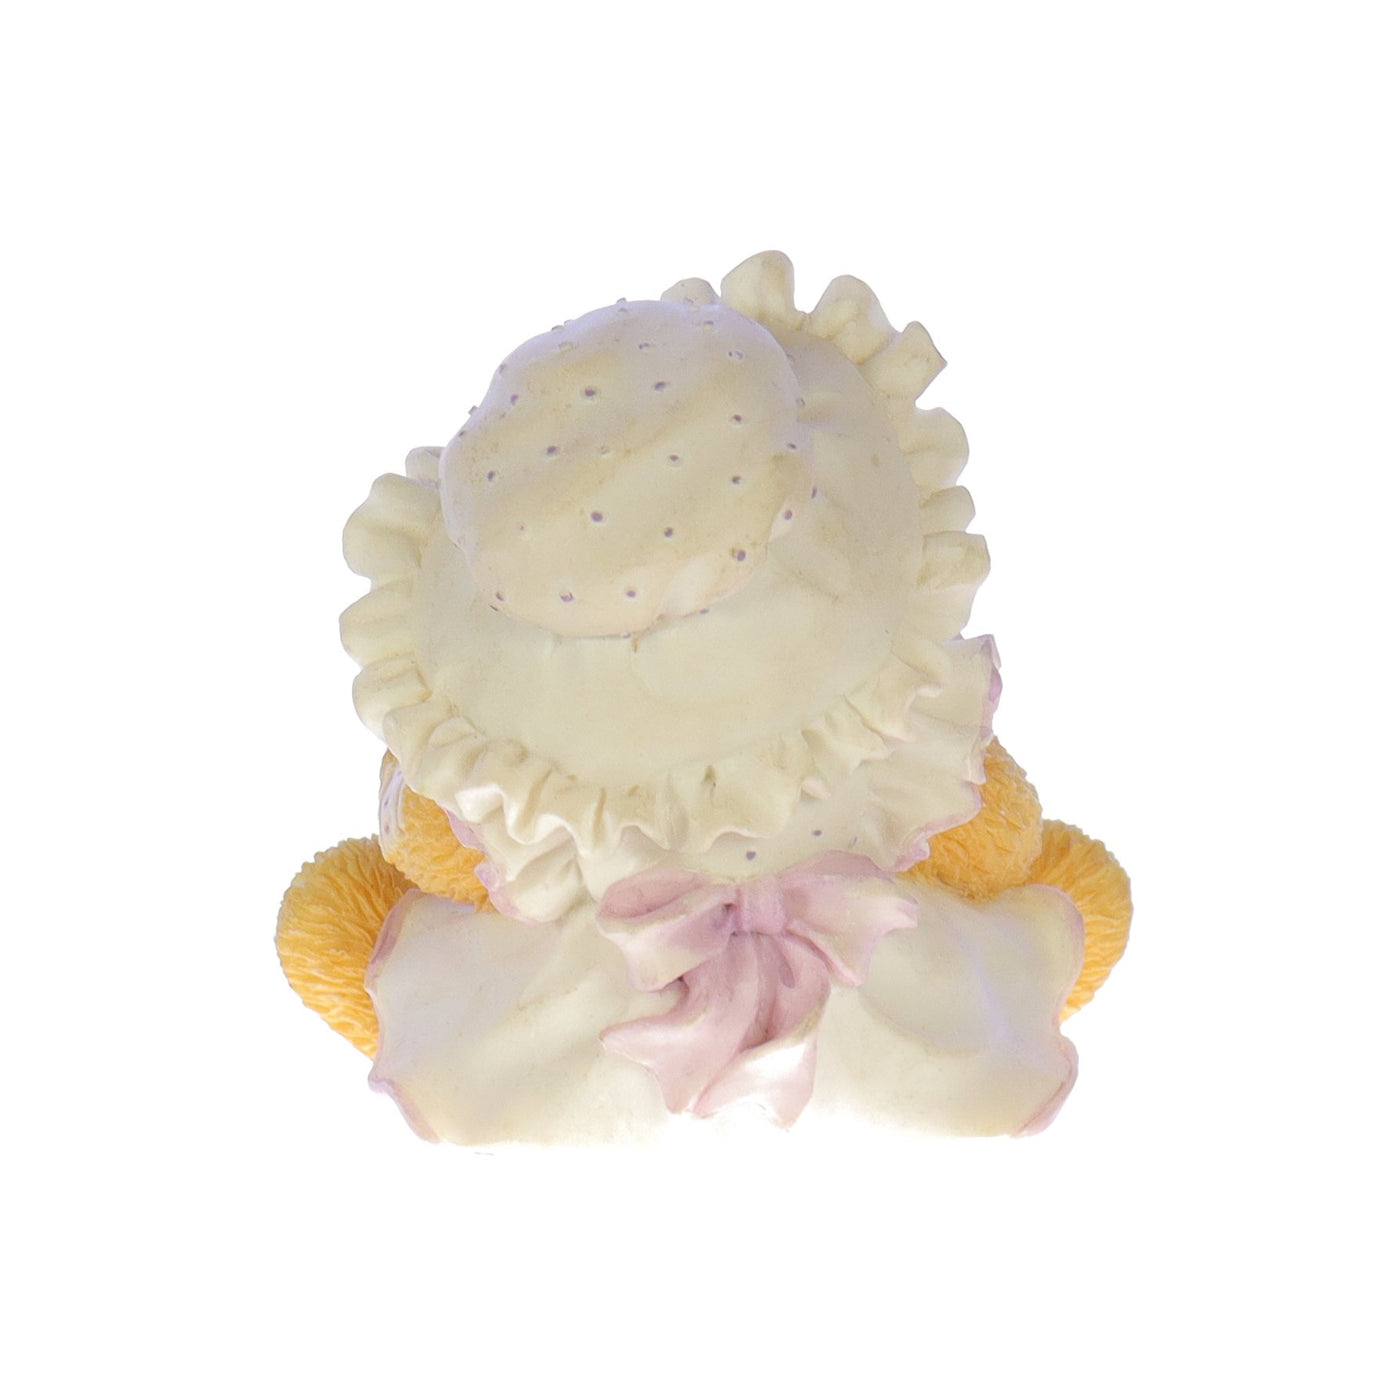 Cherished Teddies by Priscilla Hillman Resin Figurine Violet Blessings Bloom When You Are Near_